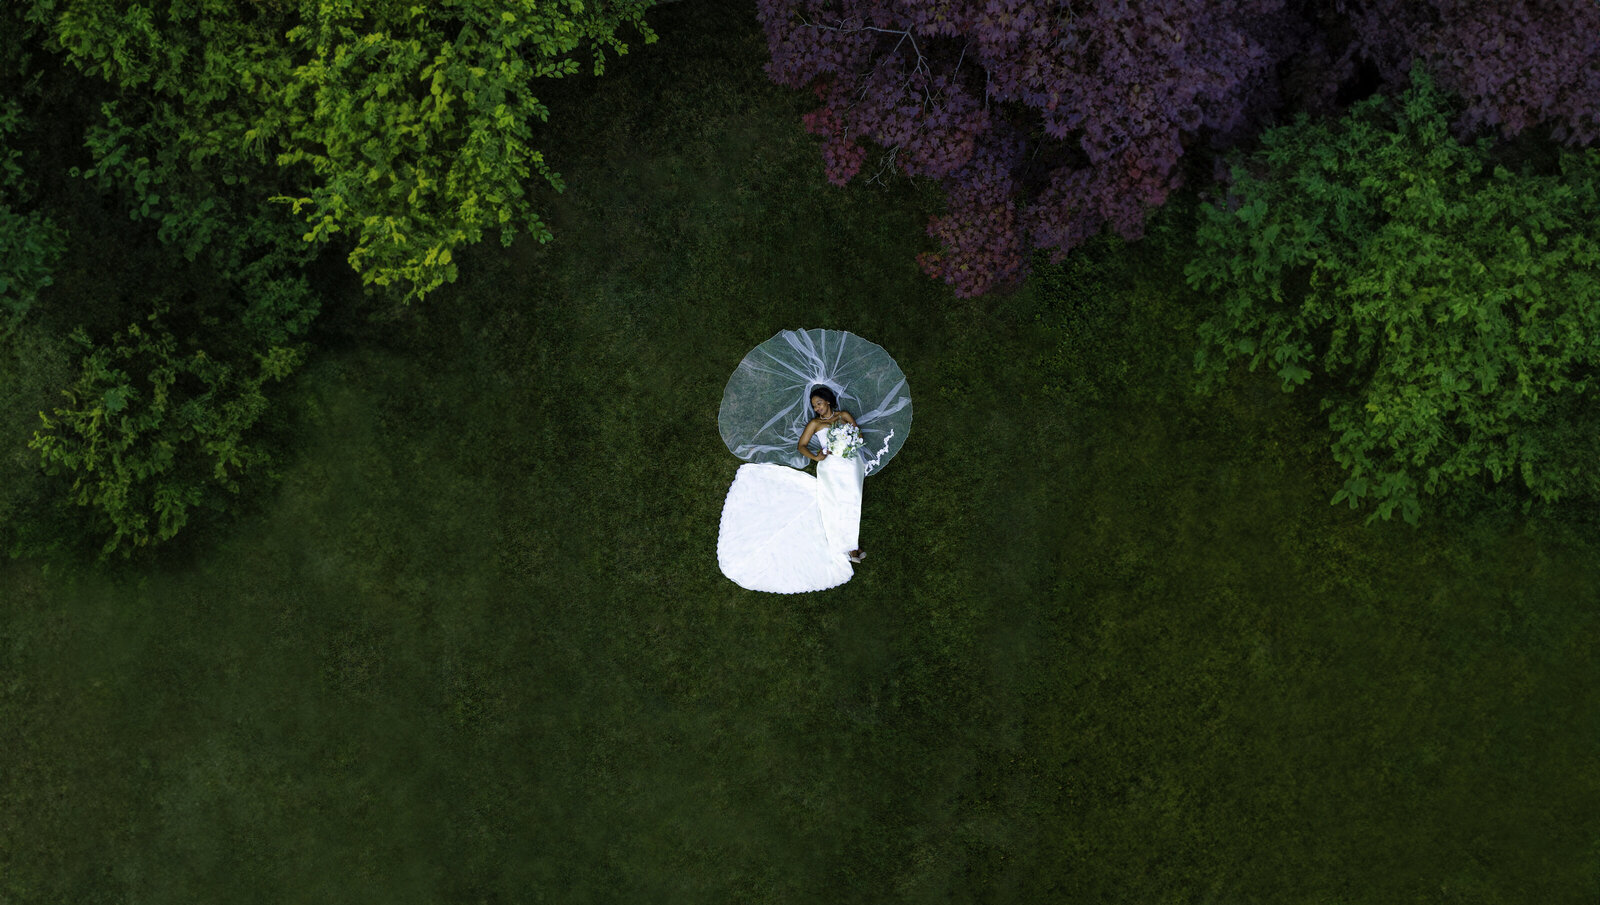 Bride laying in a field with trees surrounding her and her dress and veil spread out, captured with a drone by sacramento wedding photographer philippe studio pro.